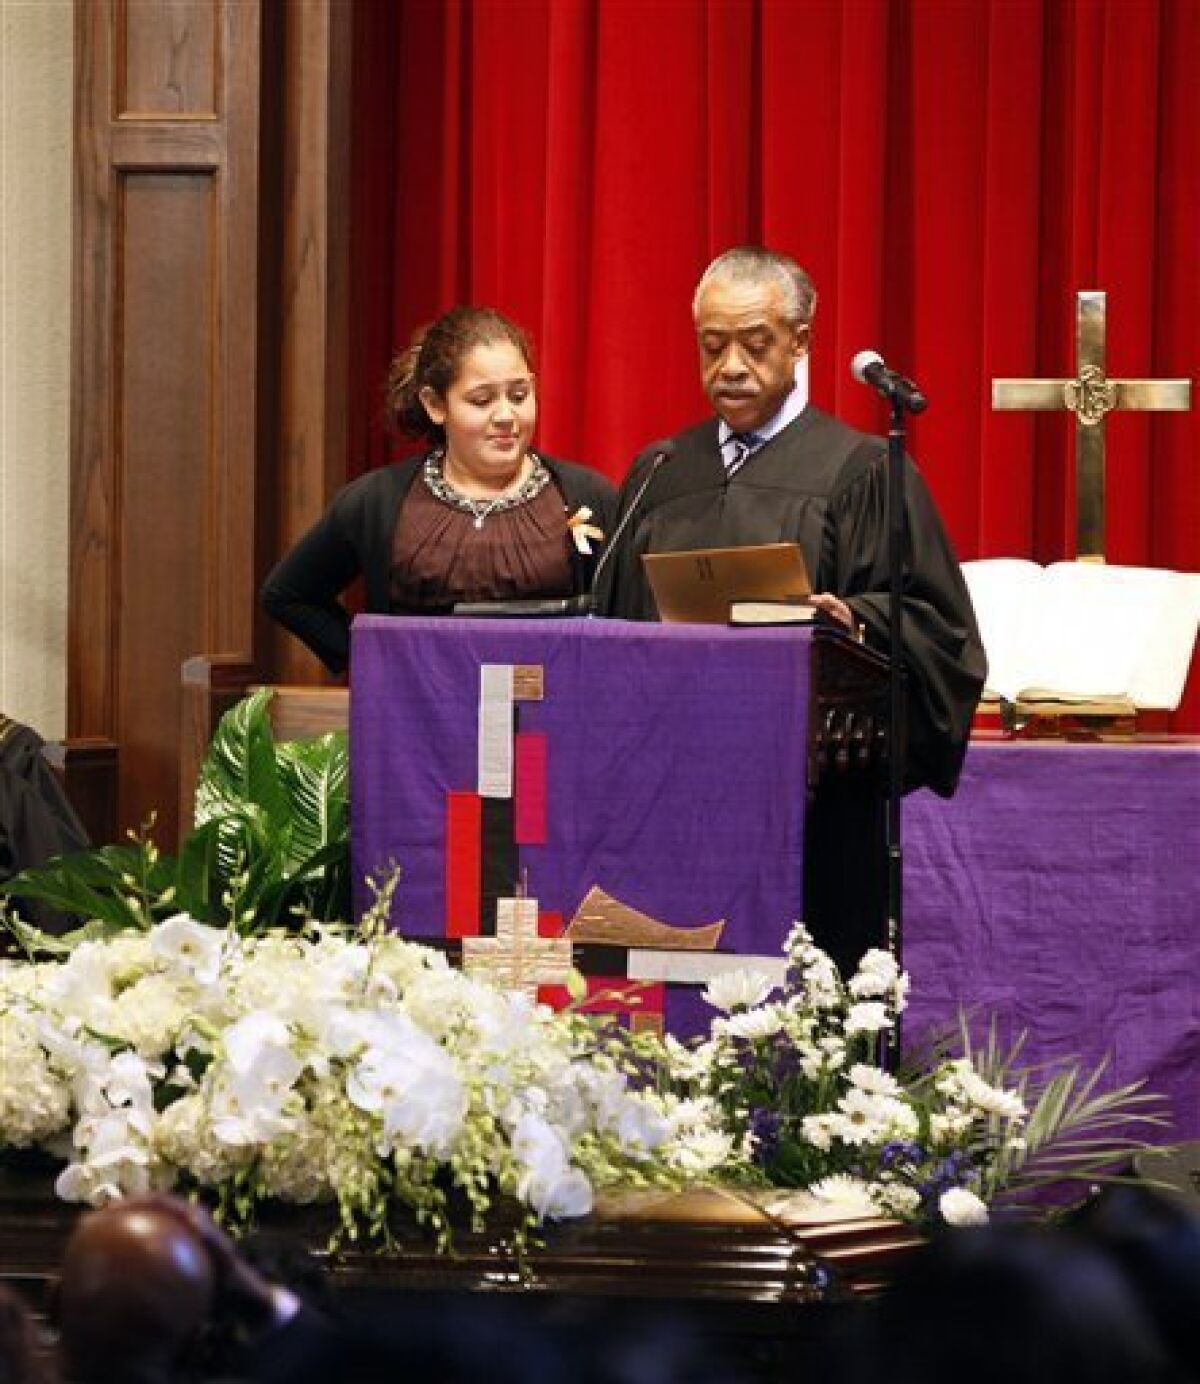 The Rev. Al Sharpton, right, reads a letter from President Barack Obama to Xea Myers 11-year-old daughter of Dwight Errington Myers, later known as Heavy D, during his funeral at Grace Baptist Church in Mount Vernon, N.Y., Friday, Nov. 18, 2011. The rapper, producer and actor died on Nov. 8, in Los Angeles. (AP Photo/David Karp)